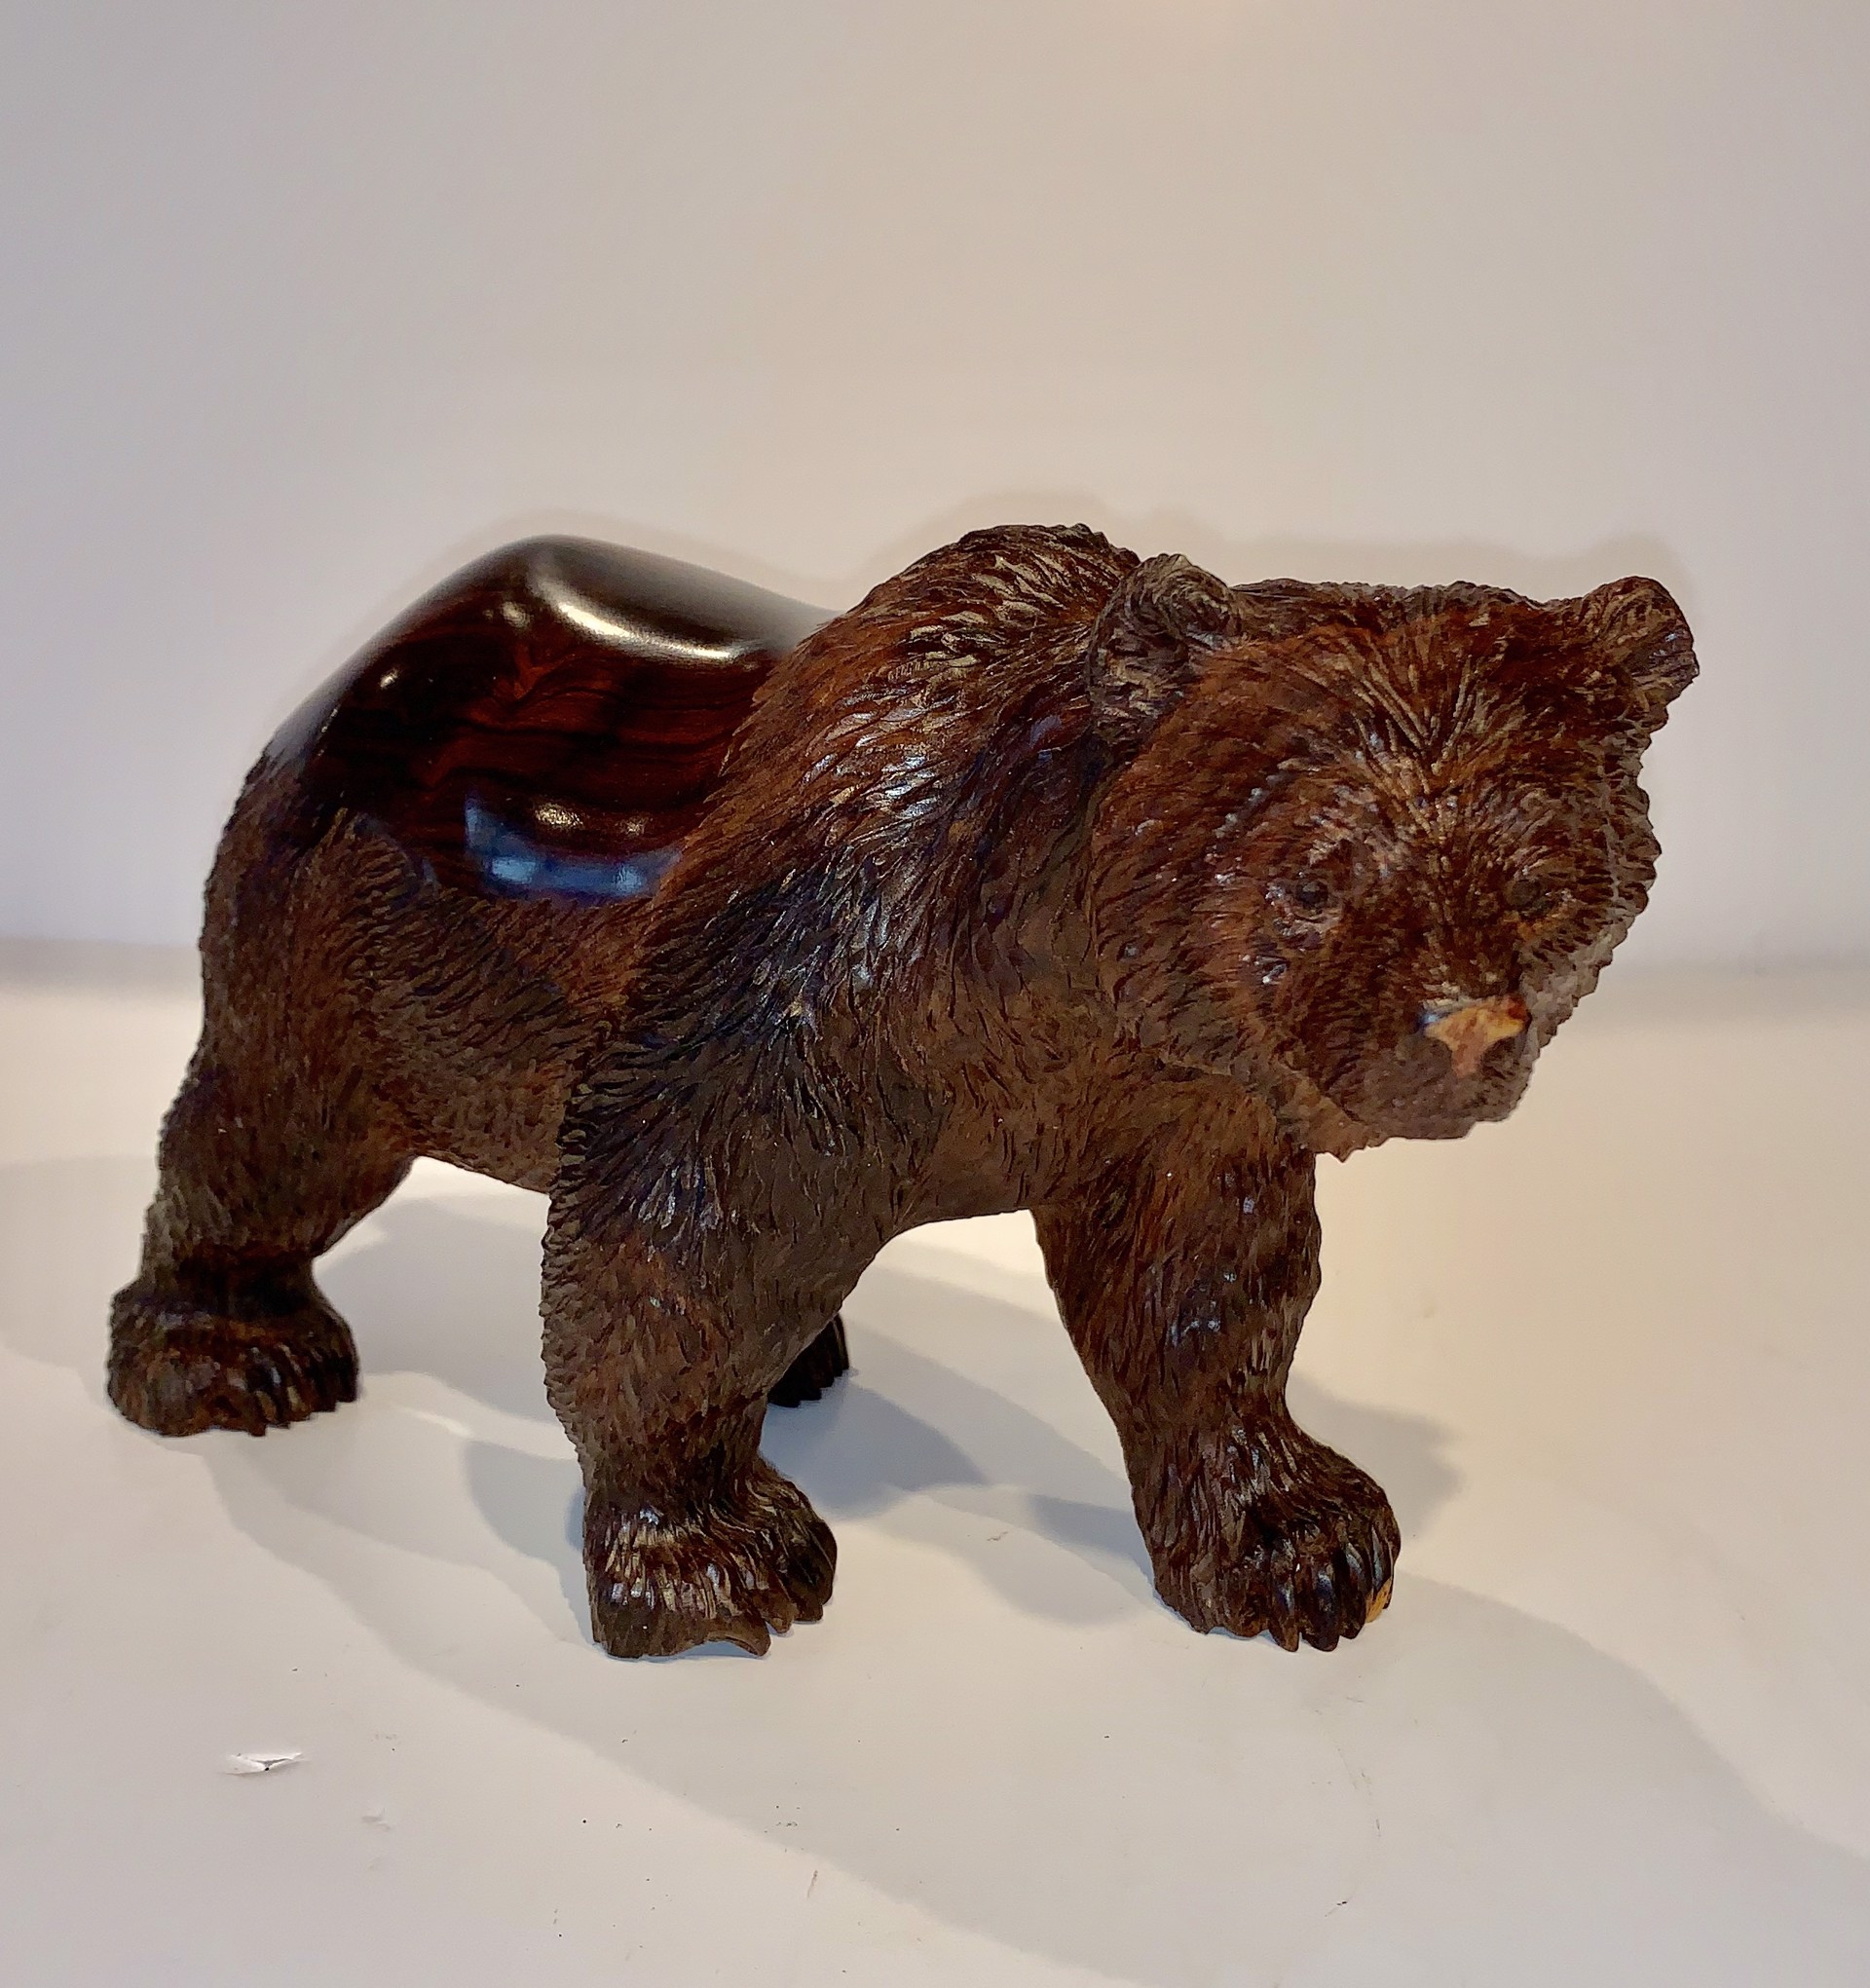 Small Bear Looking Right by Thomas Suby